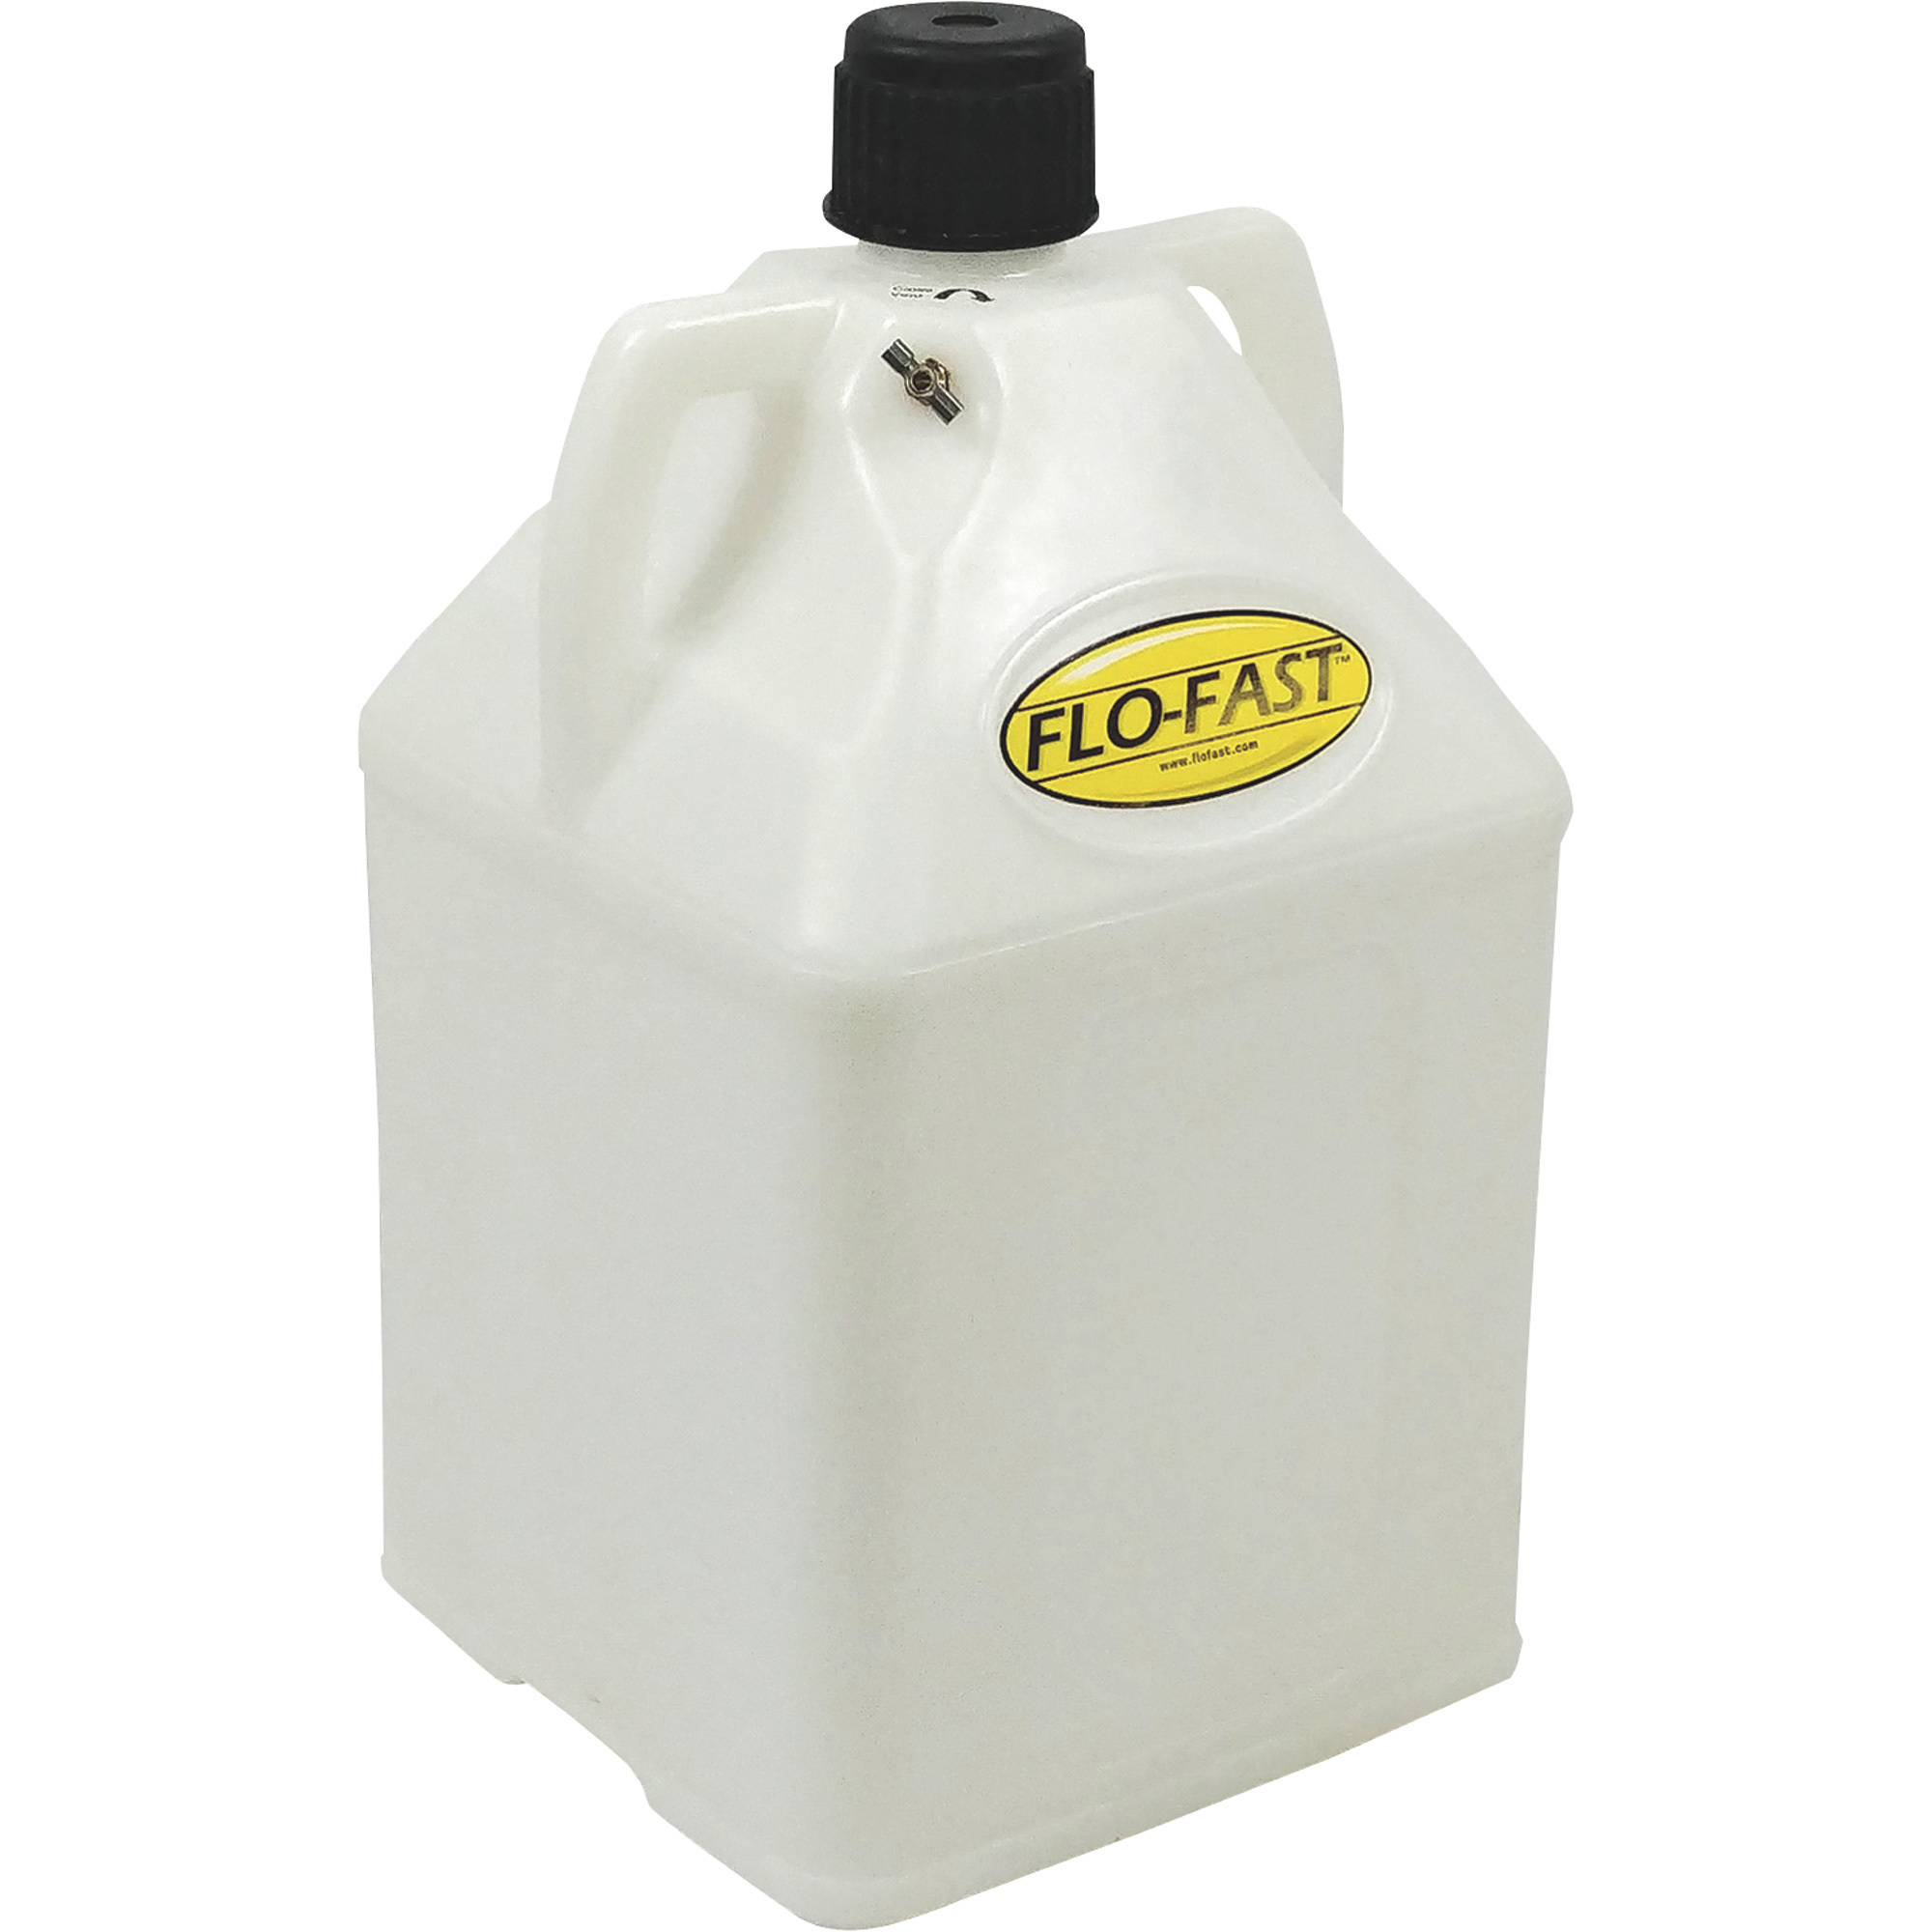 FLO-FAST Container, 15-Gallon, Natural, For Chemicals and Hazmat Fluids, Model 15502